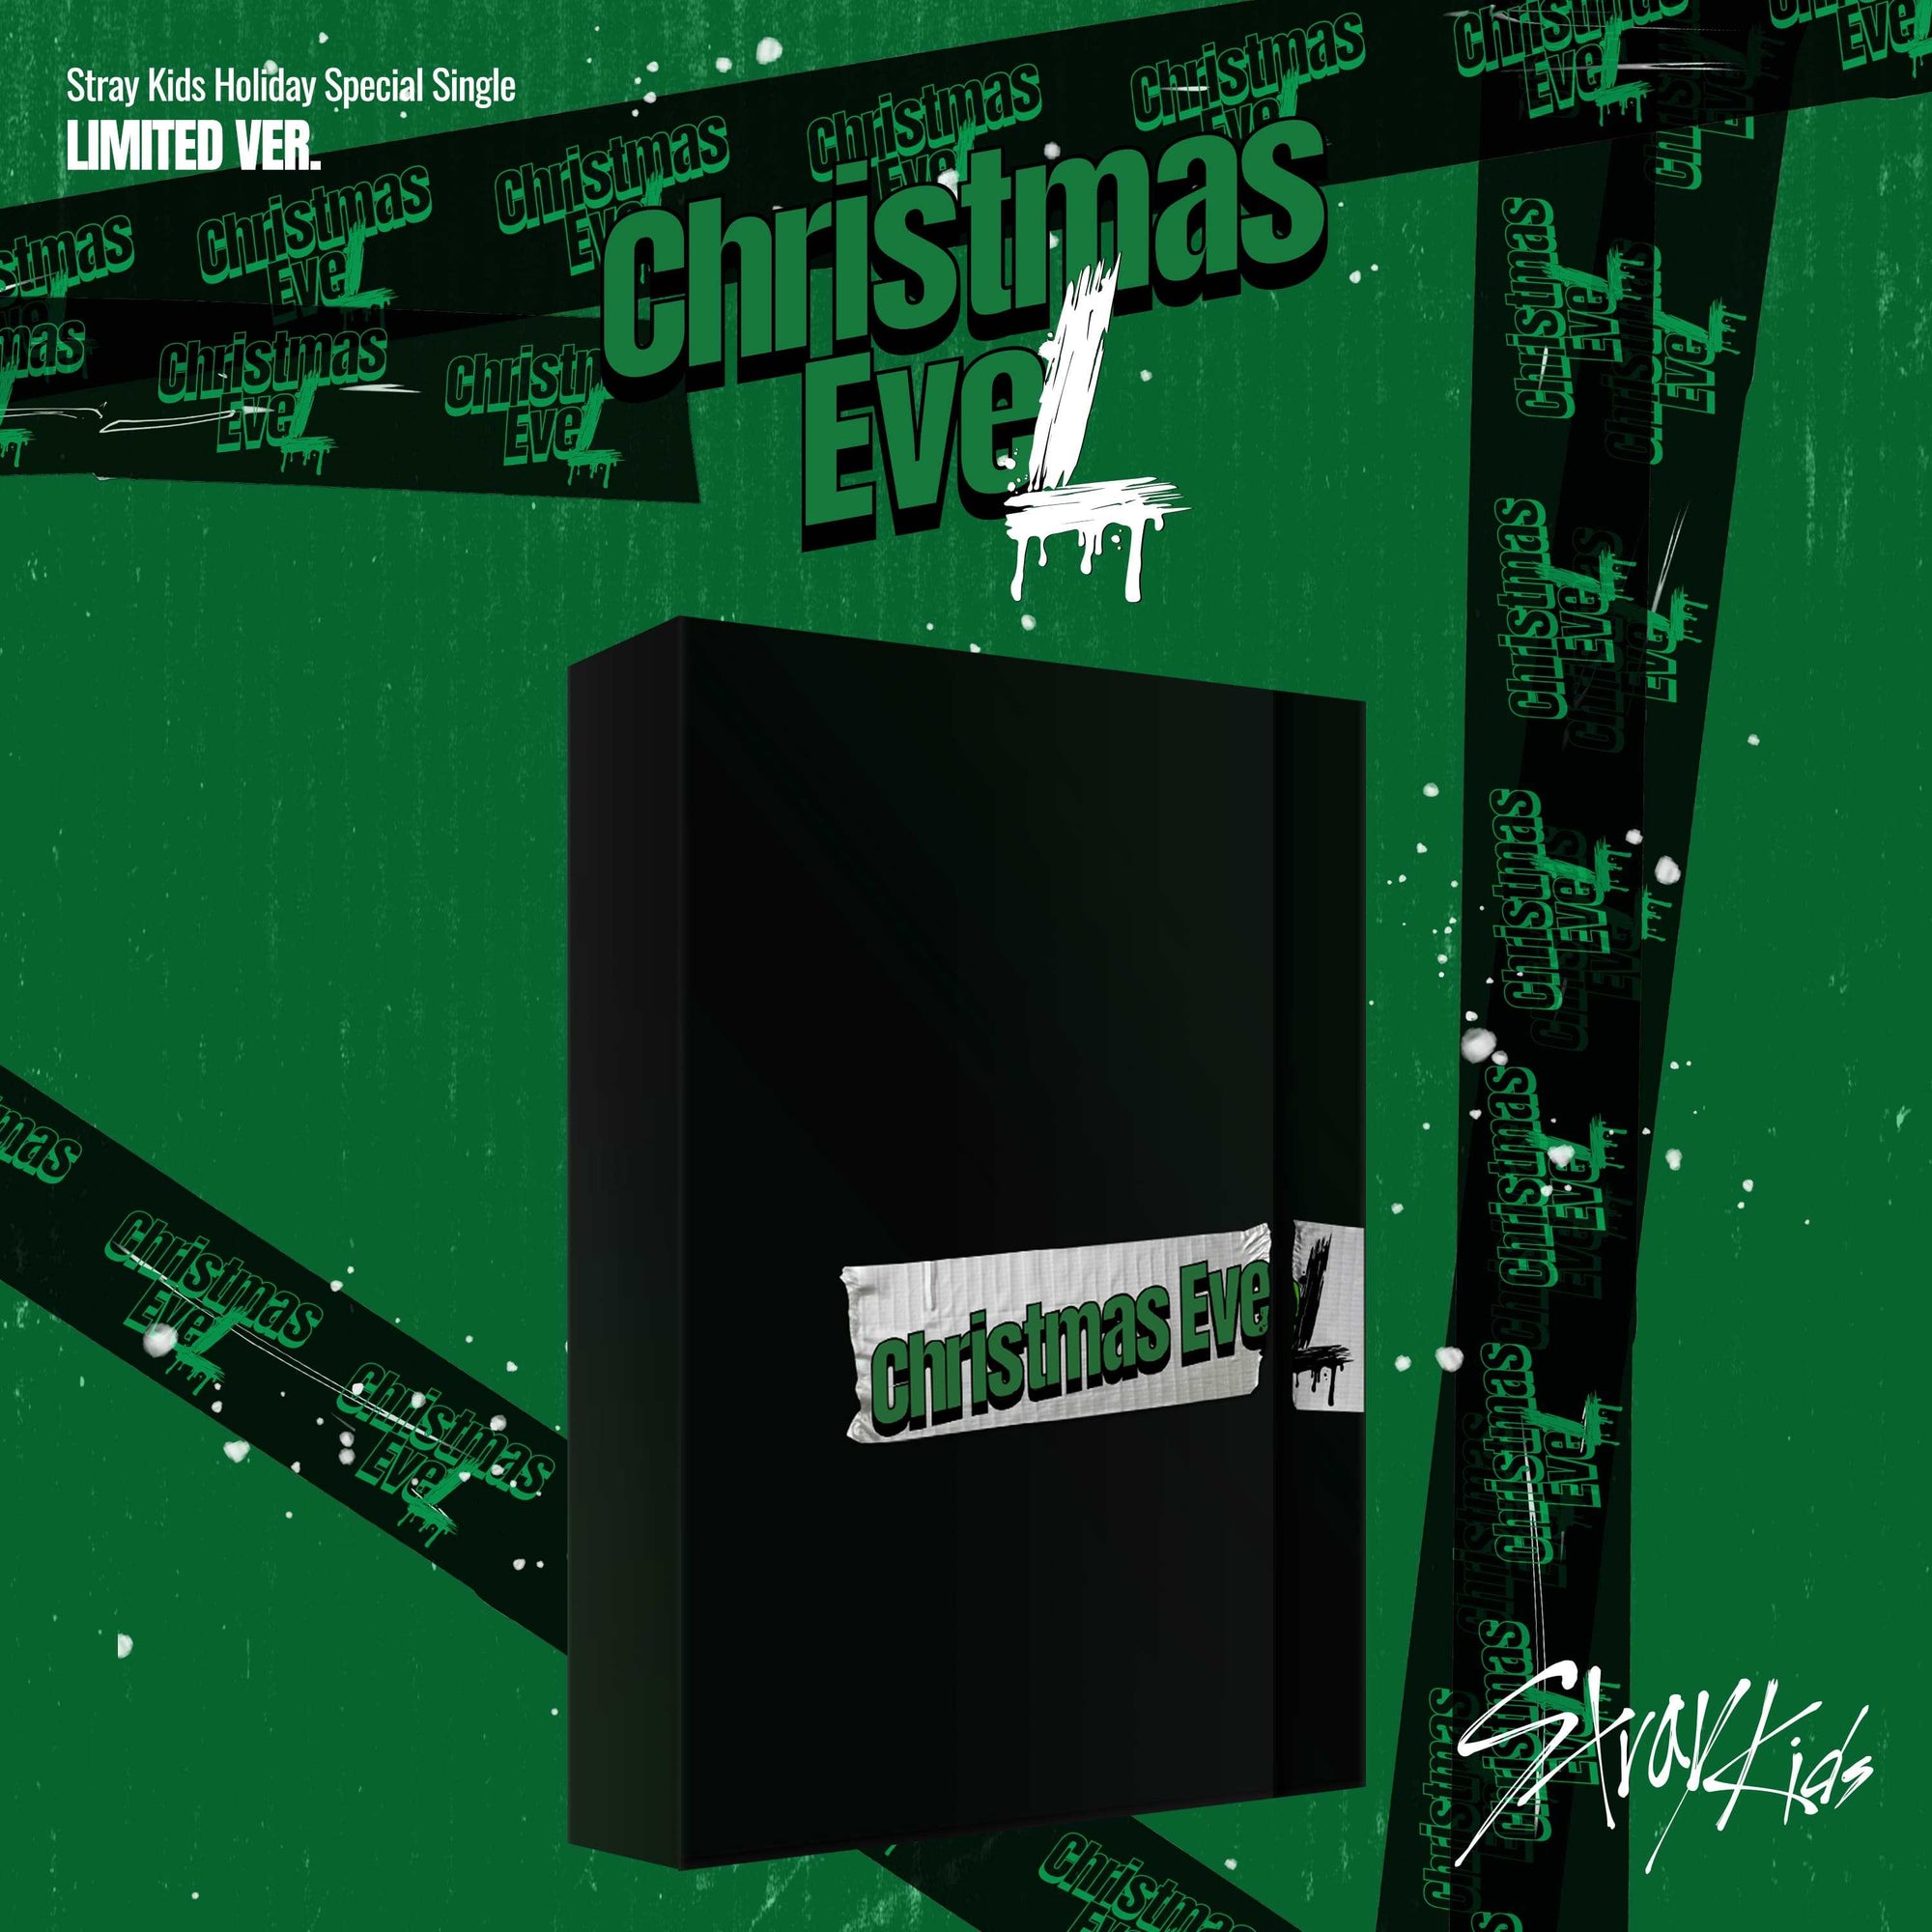 Stray Kids - Holiday Special Single - Christmas EveL (Limited Edition)